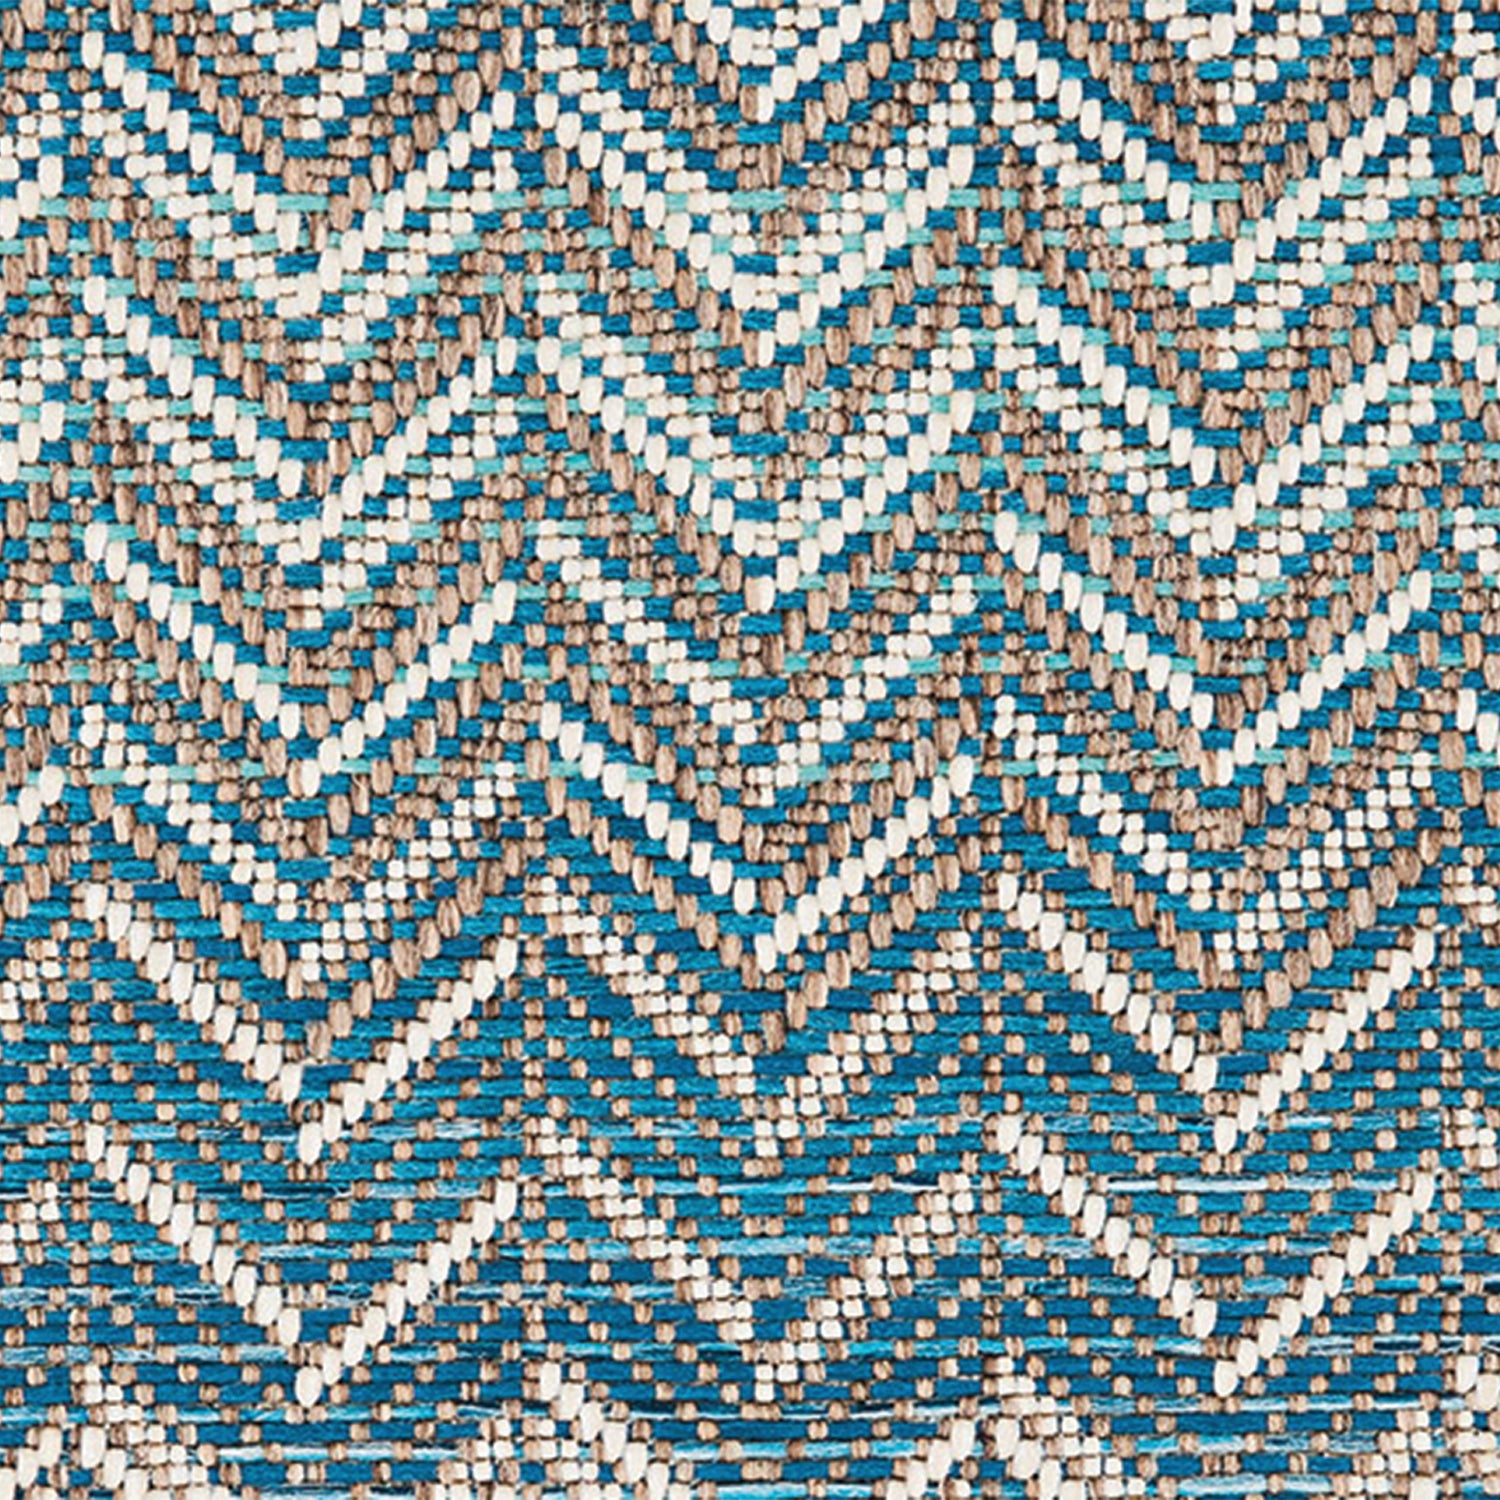 Outdoor broadloom carpet swatch in a striped herringbone weave in turquoise, tan and white.